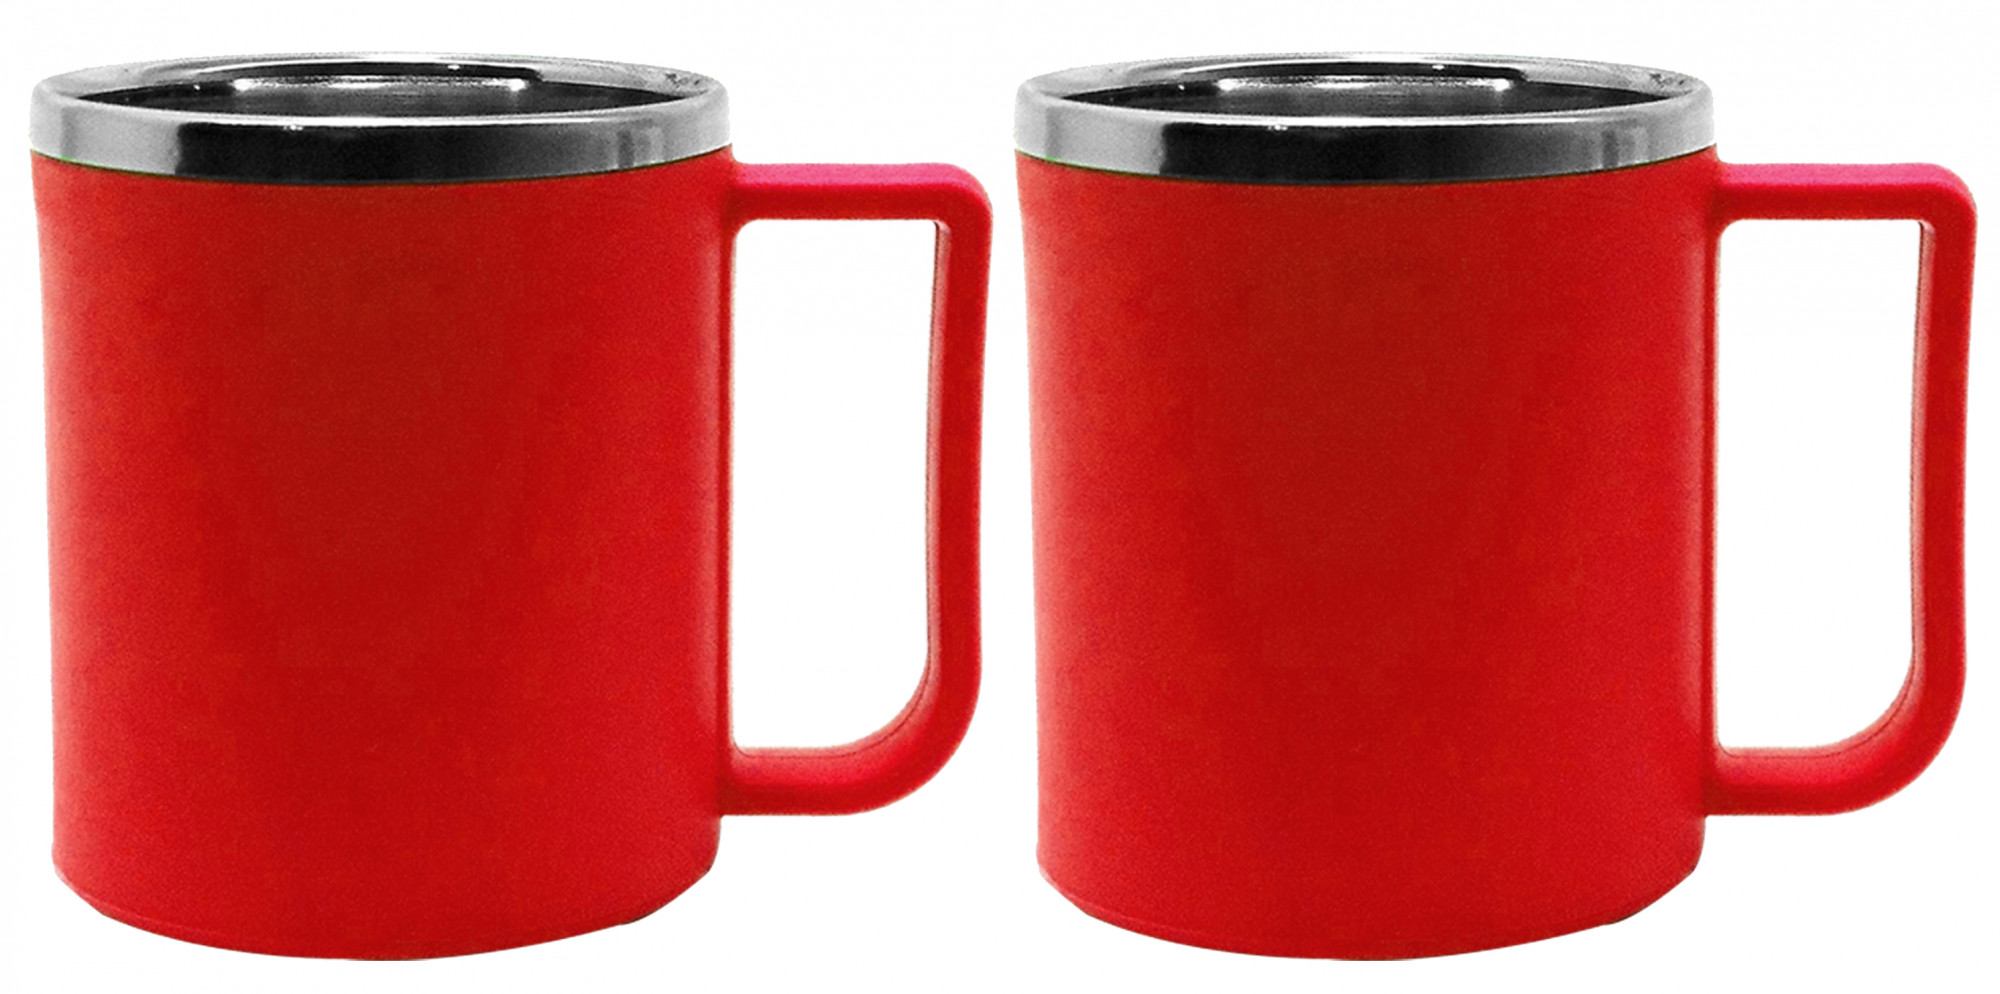 Kuber Industries Plastic Steel Cups for Coffee Tea Cocoa, Camping Mugs with Handle, Portable & Easy Clean (Red)